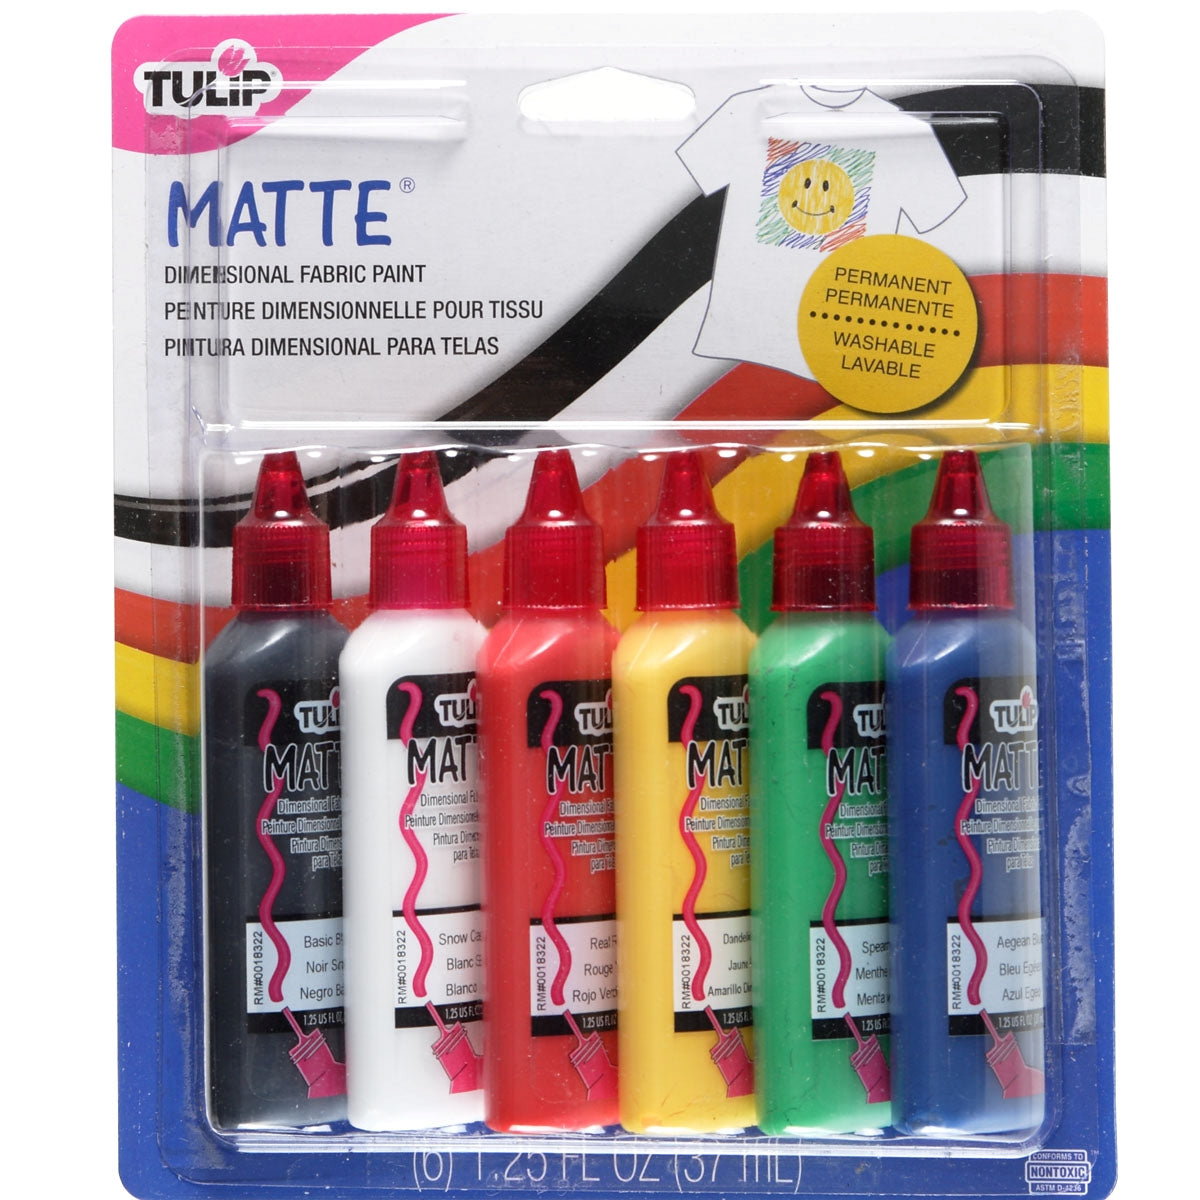 Tulip Dimensional Fabric Paint Matte 6 Pack Clearance